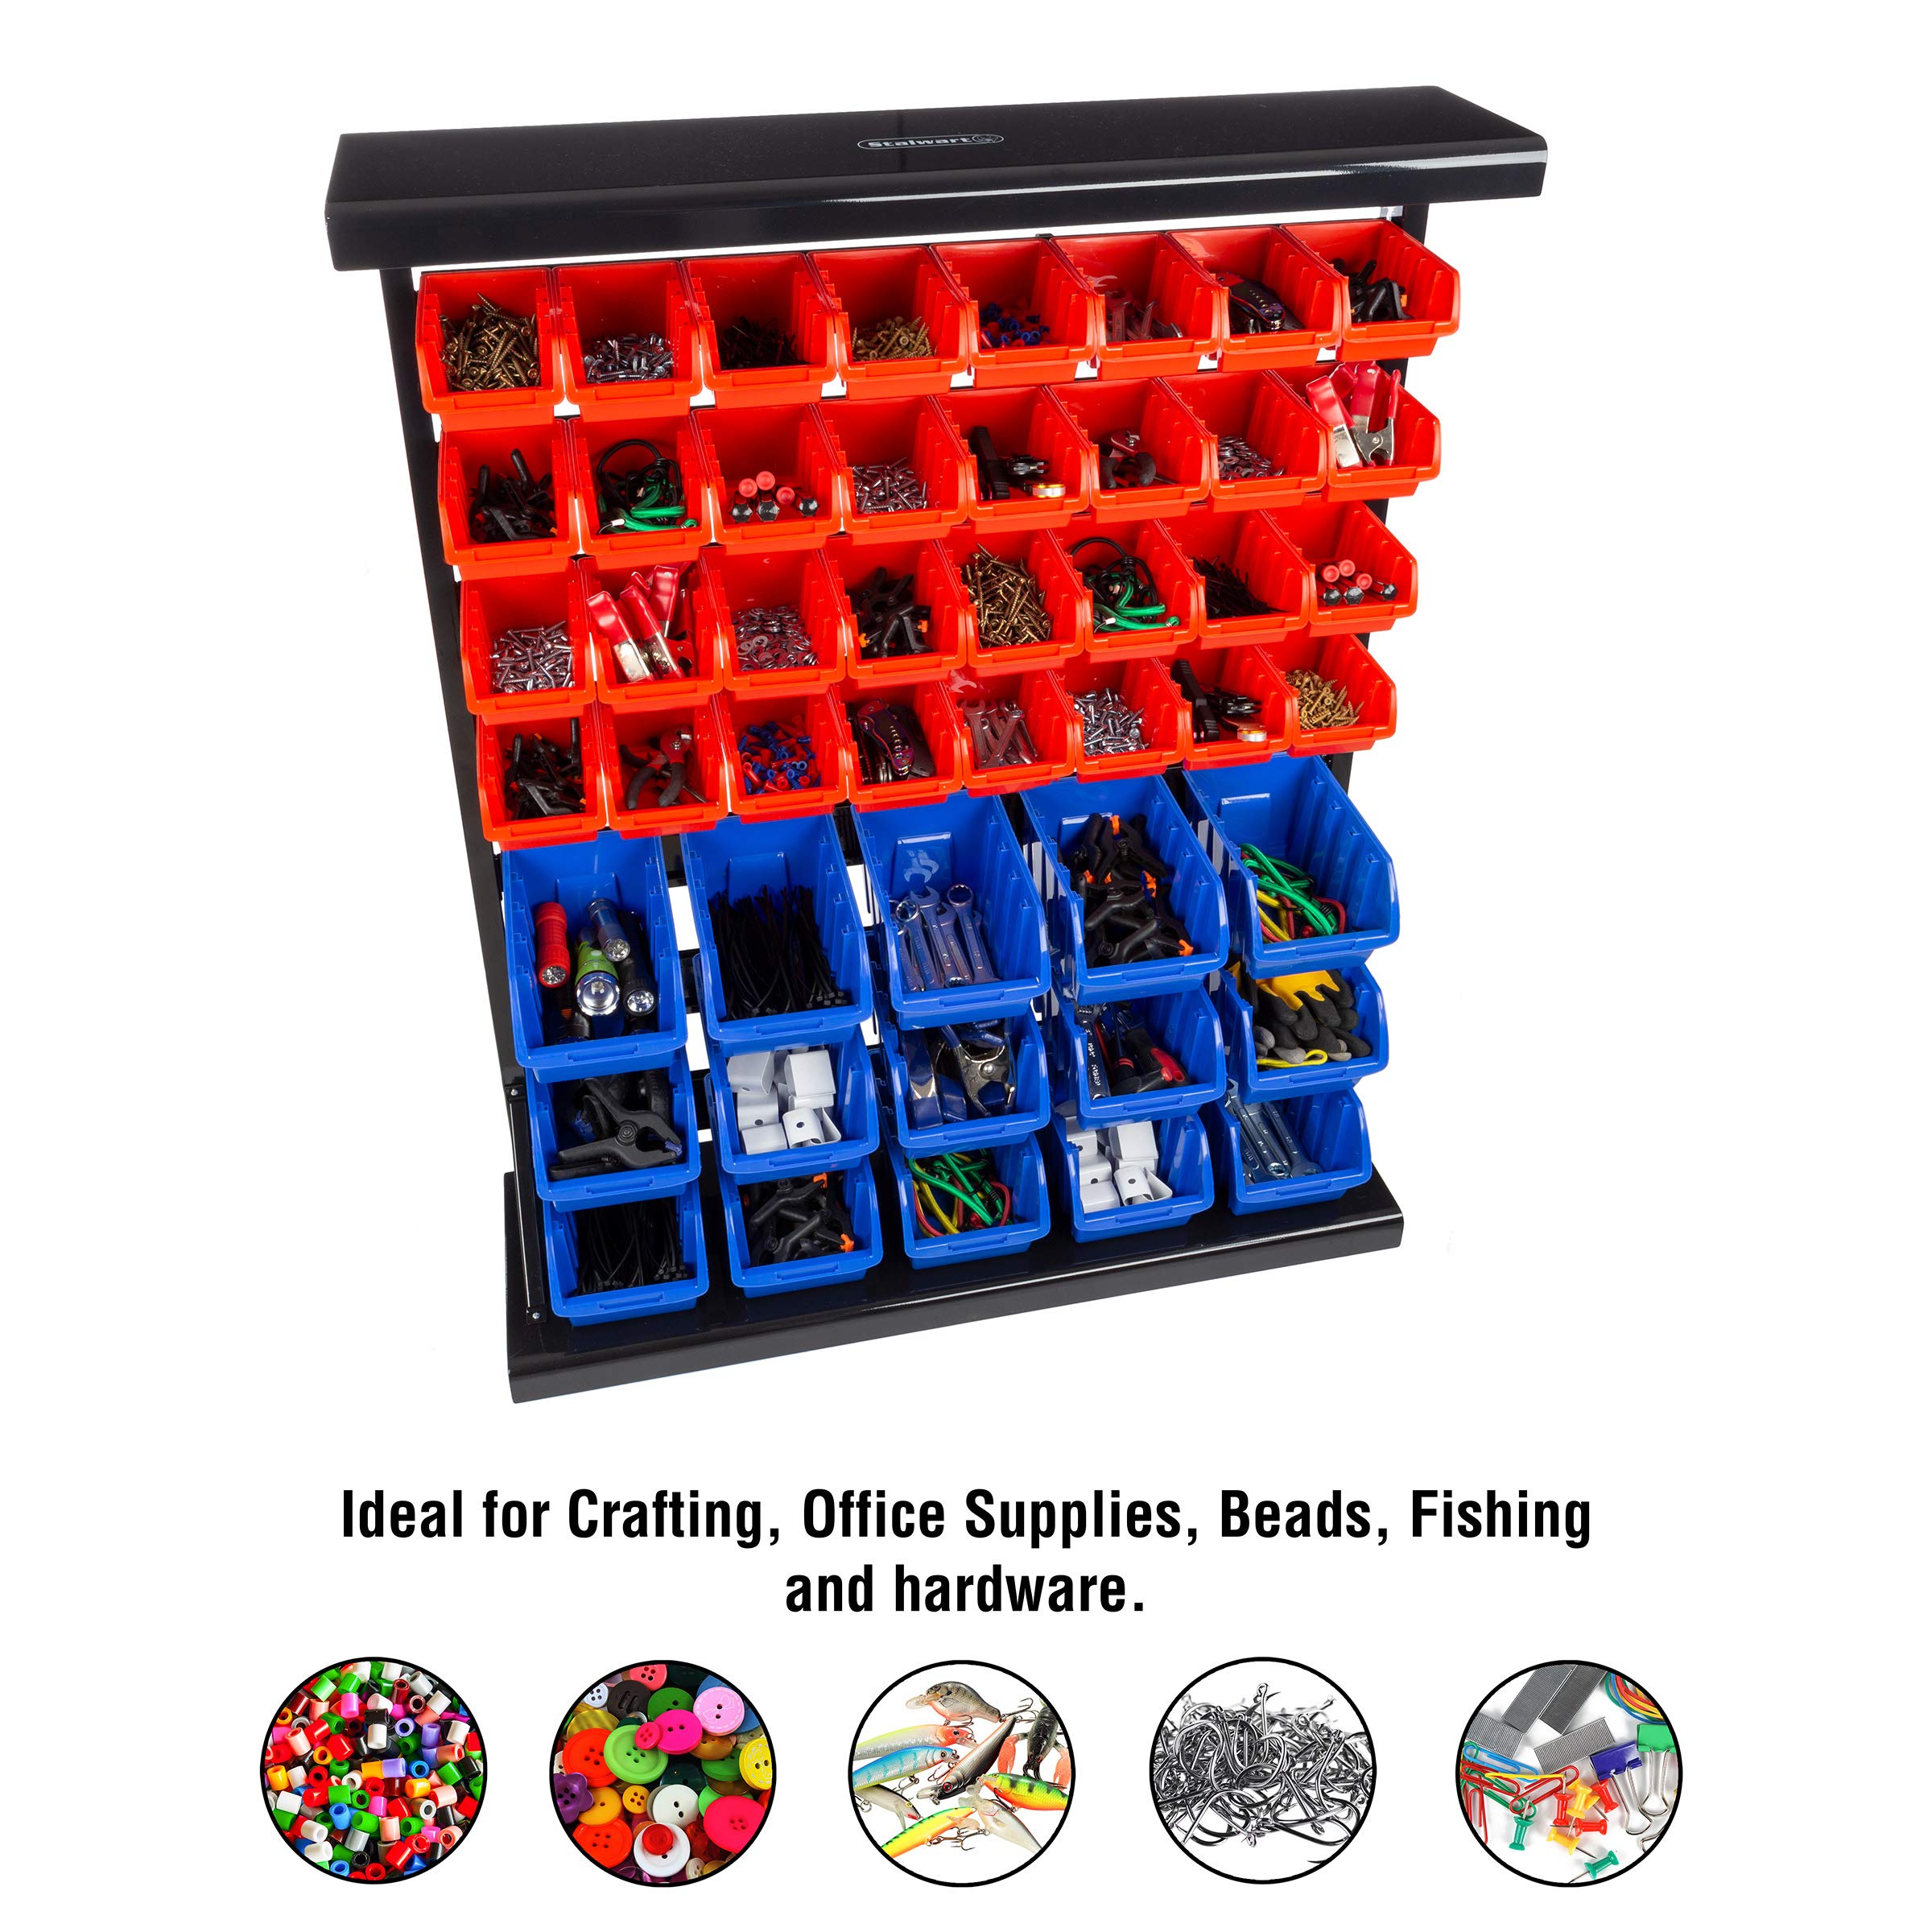 Stalwart 75-ST6079 orage Rack Organizer- Wall Mountable Container with Removeable Drawers for Tools, Hardware, Crafts, Office Supplies and More by Stalwart